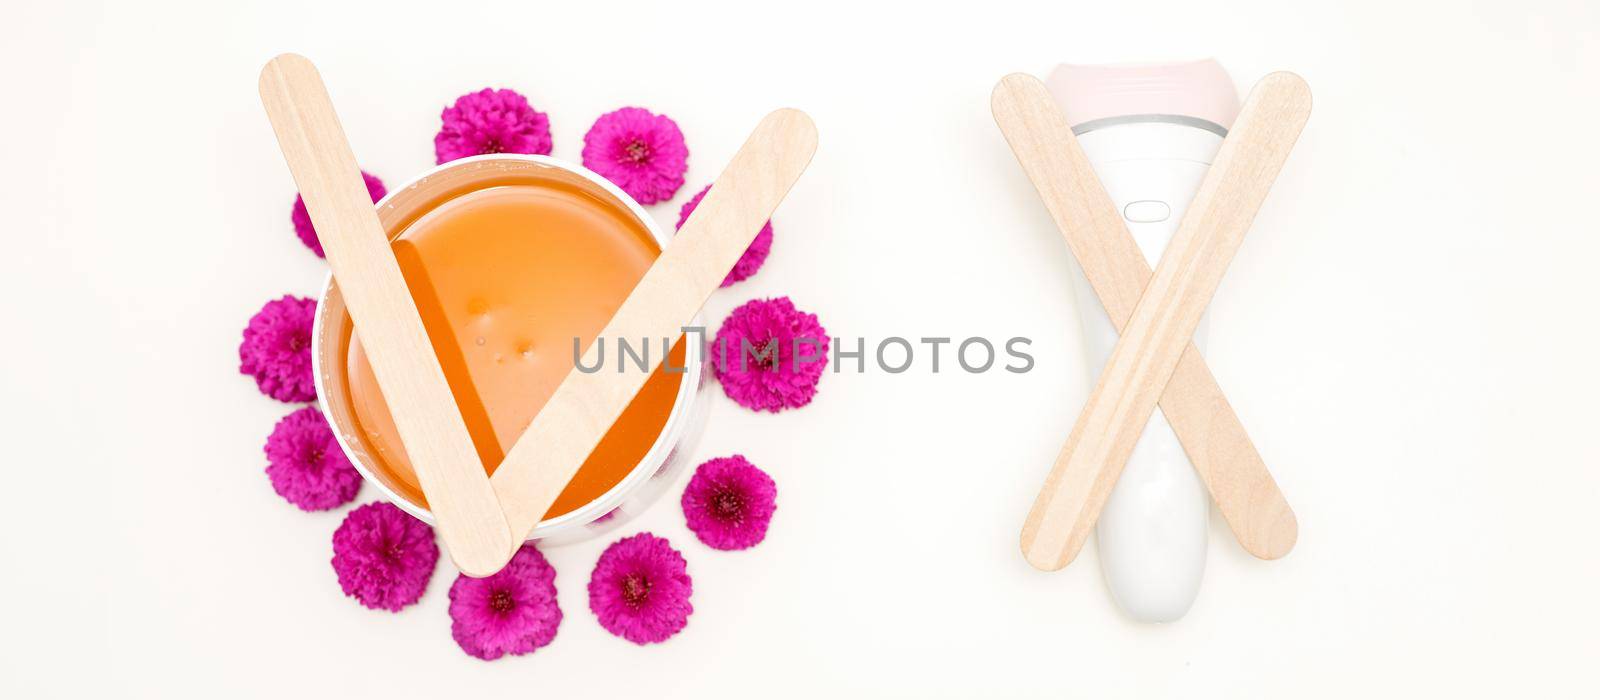 Waxing, depilation concept. Flat lay of the white cosmetic jar with sugar paste and epilator with wooden sticks lying on white background